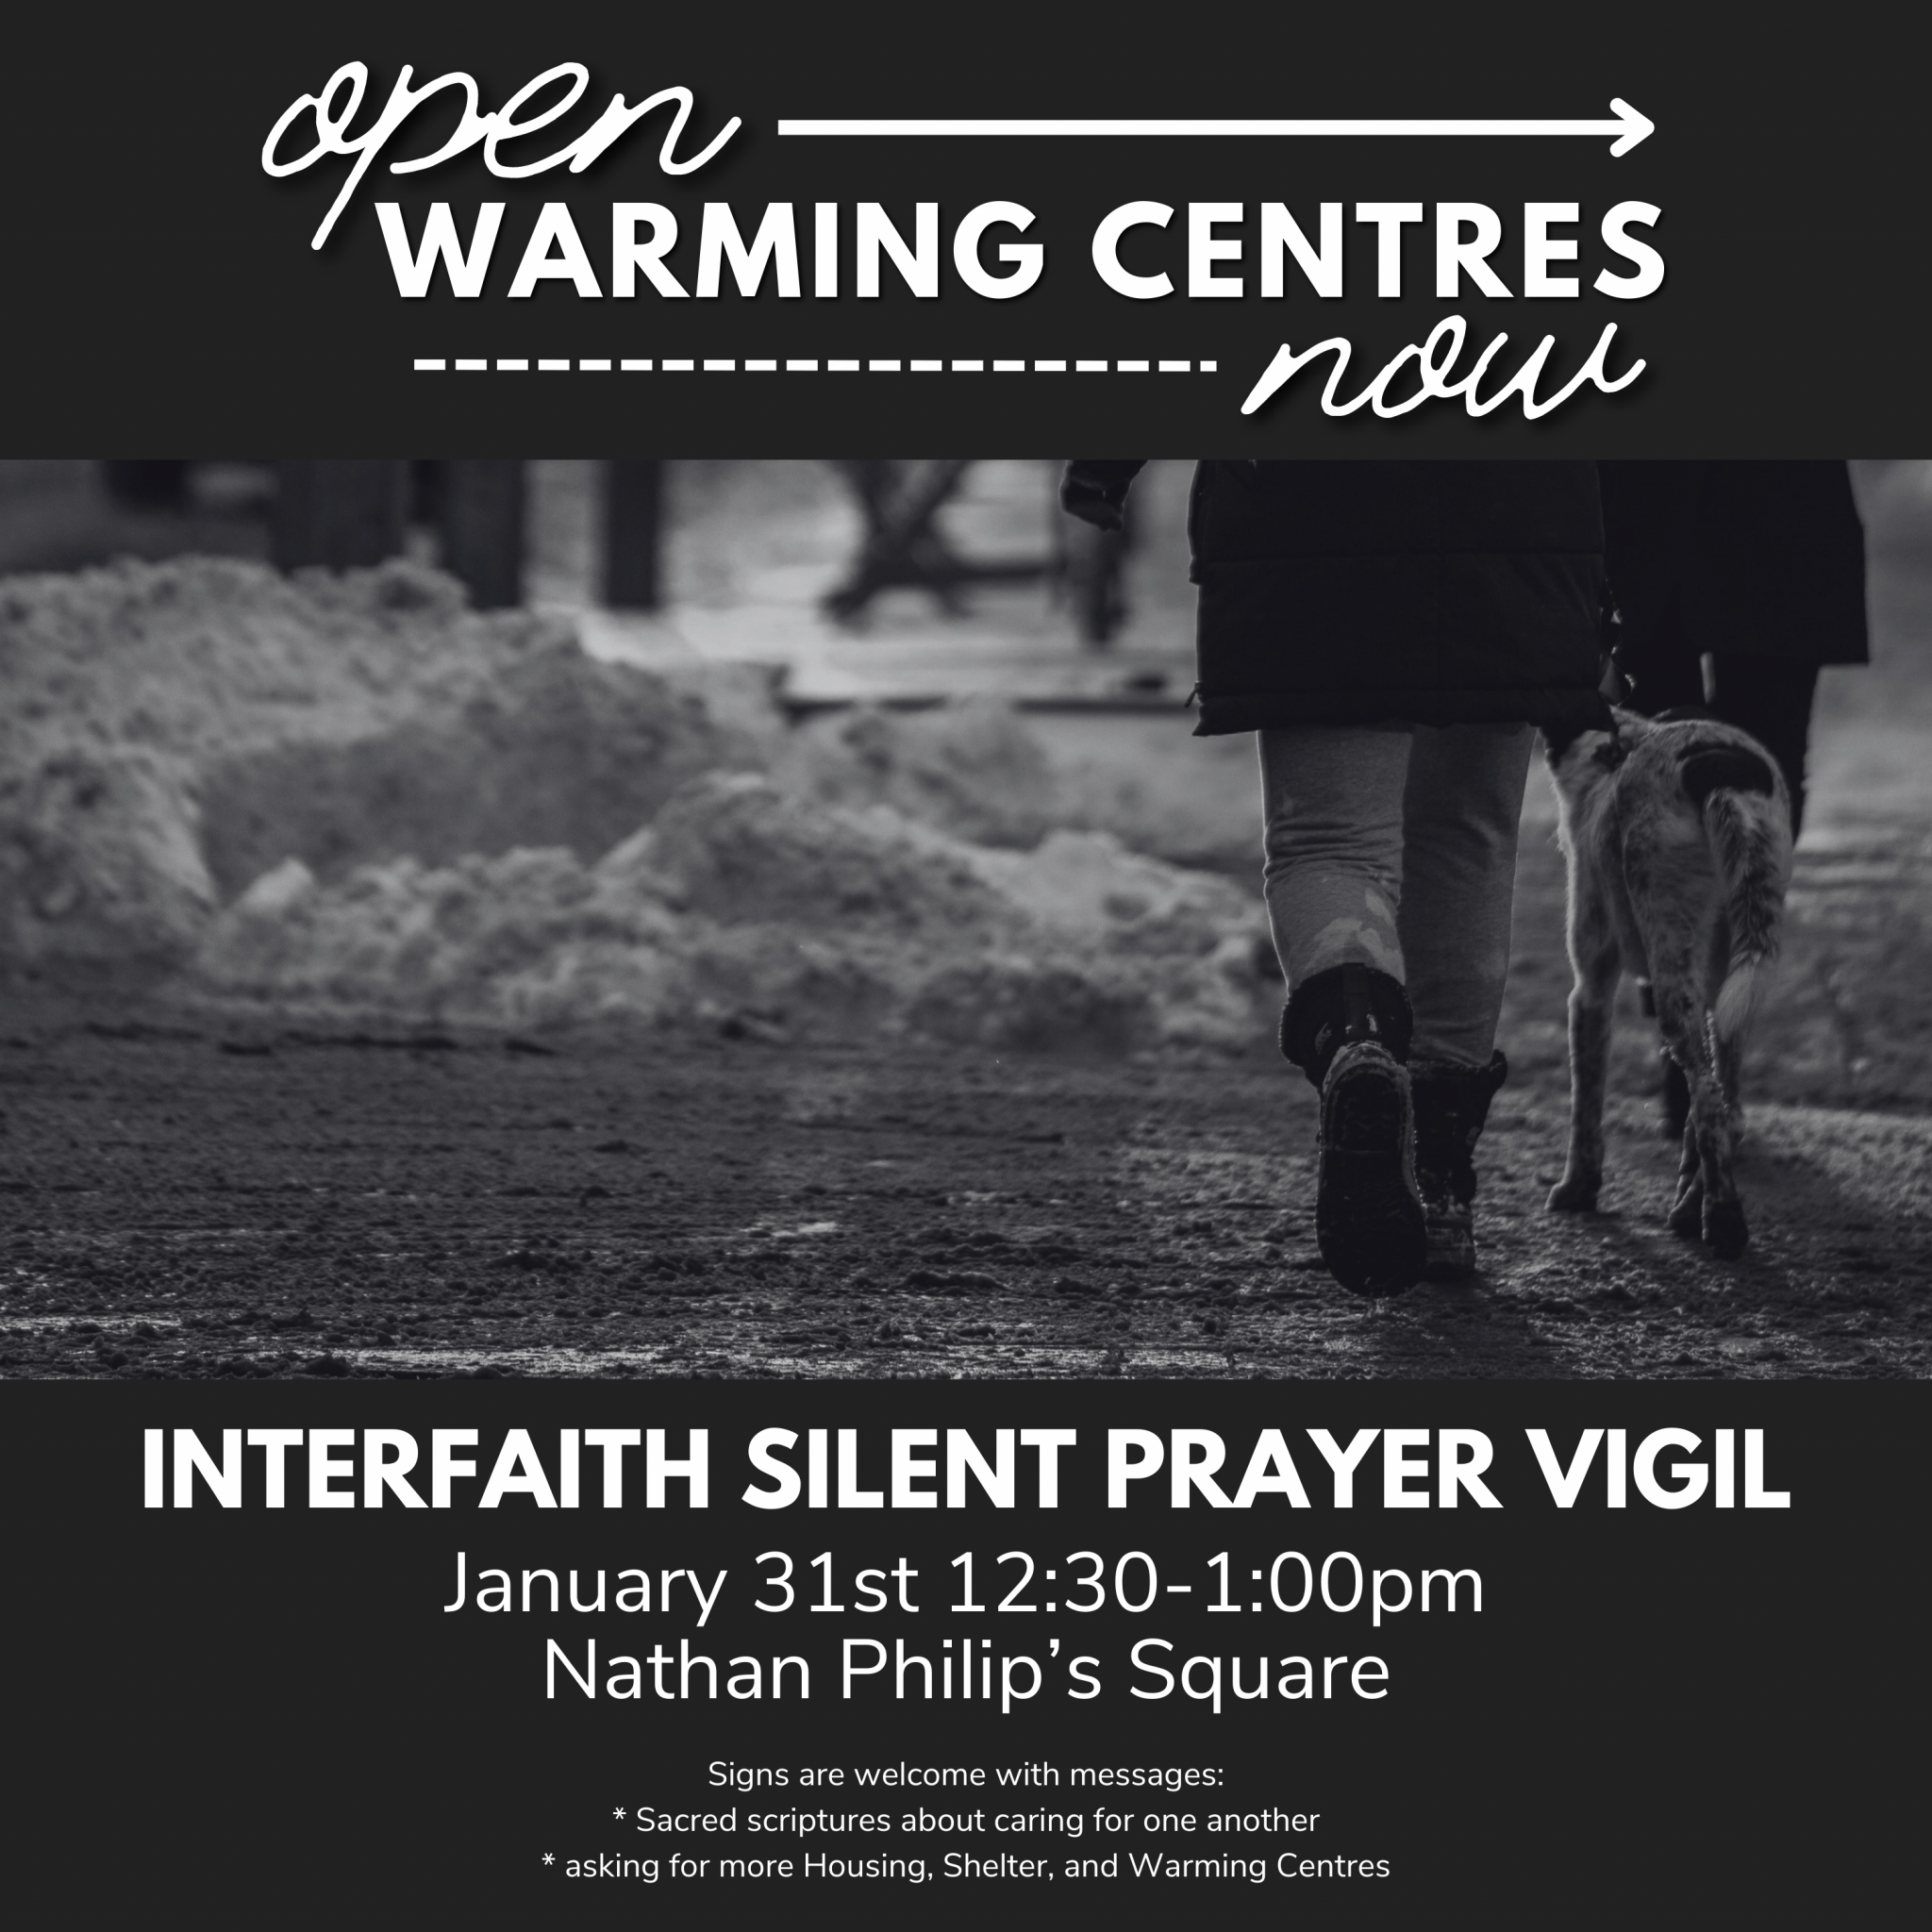 Image inviting people to attend a silent prayer vigil at Nathan Phillips Square, Tuesday, January 31st at 12:30pm.